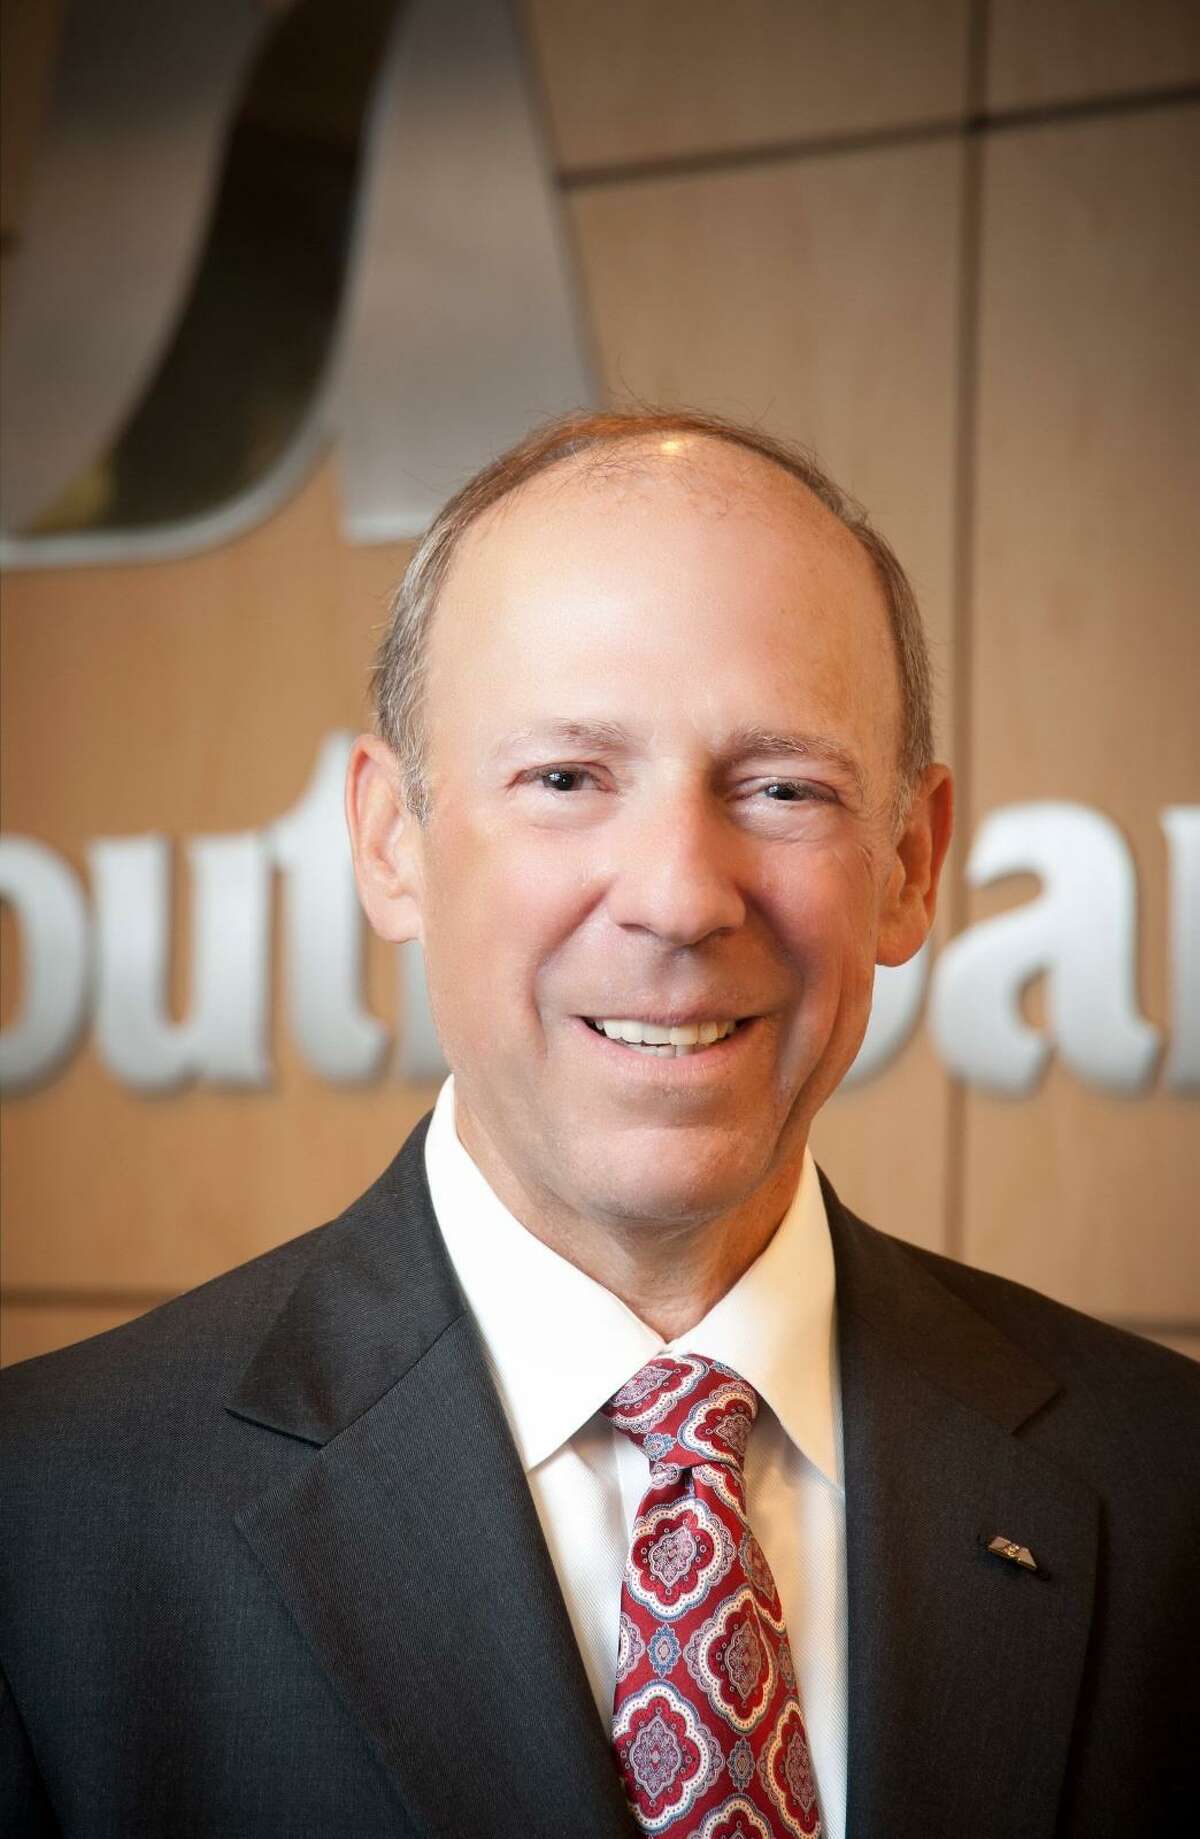 Midsouth Bank has named Joe Tortorice, Jr., vice chairman of the board, effective Dec. 31, 2016. (Contributed photo)